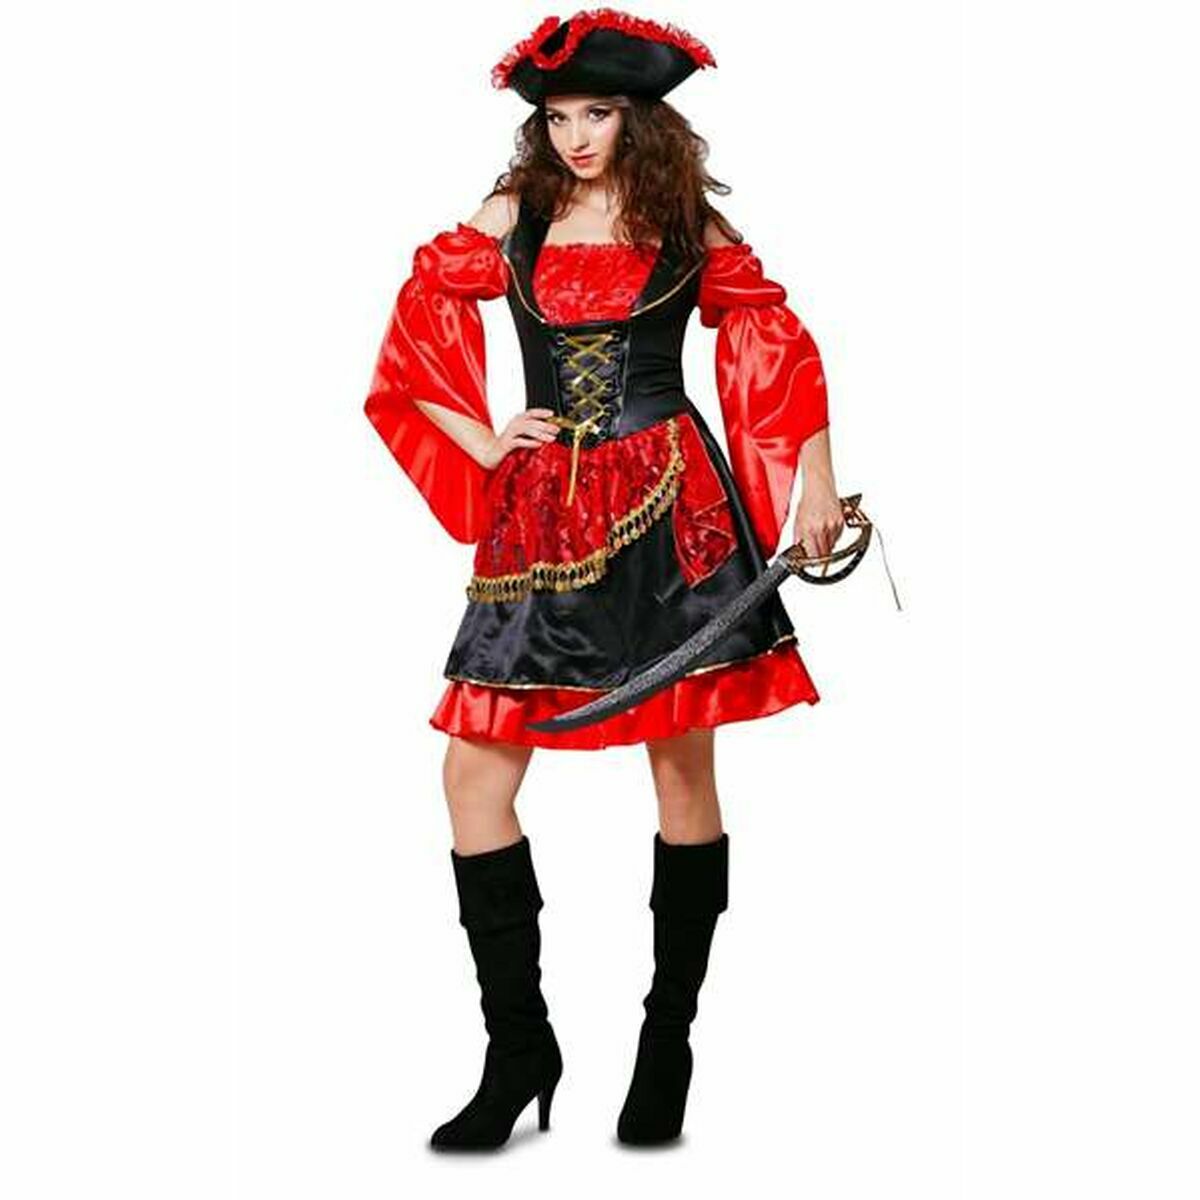 Costume for Adults My Other Me Descarada Pirate Red